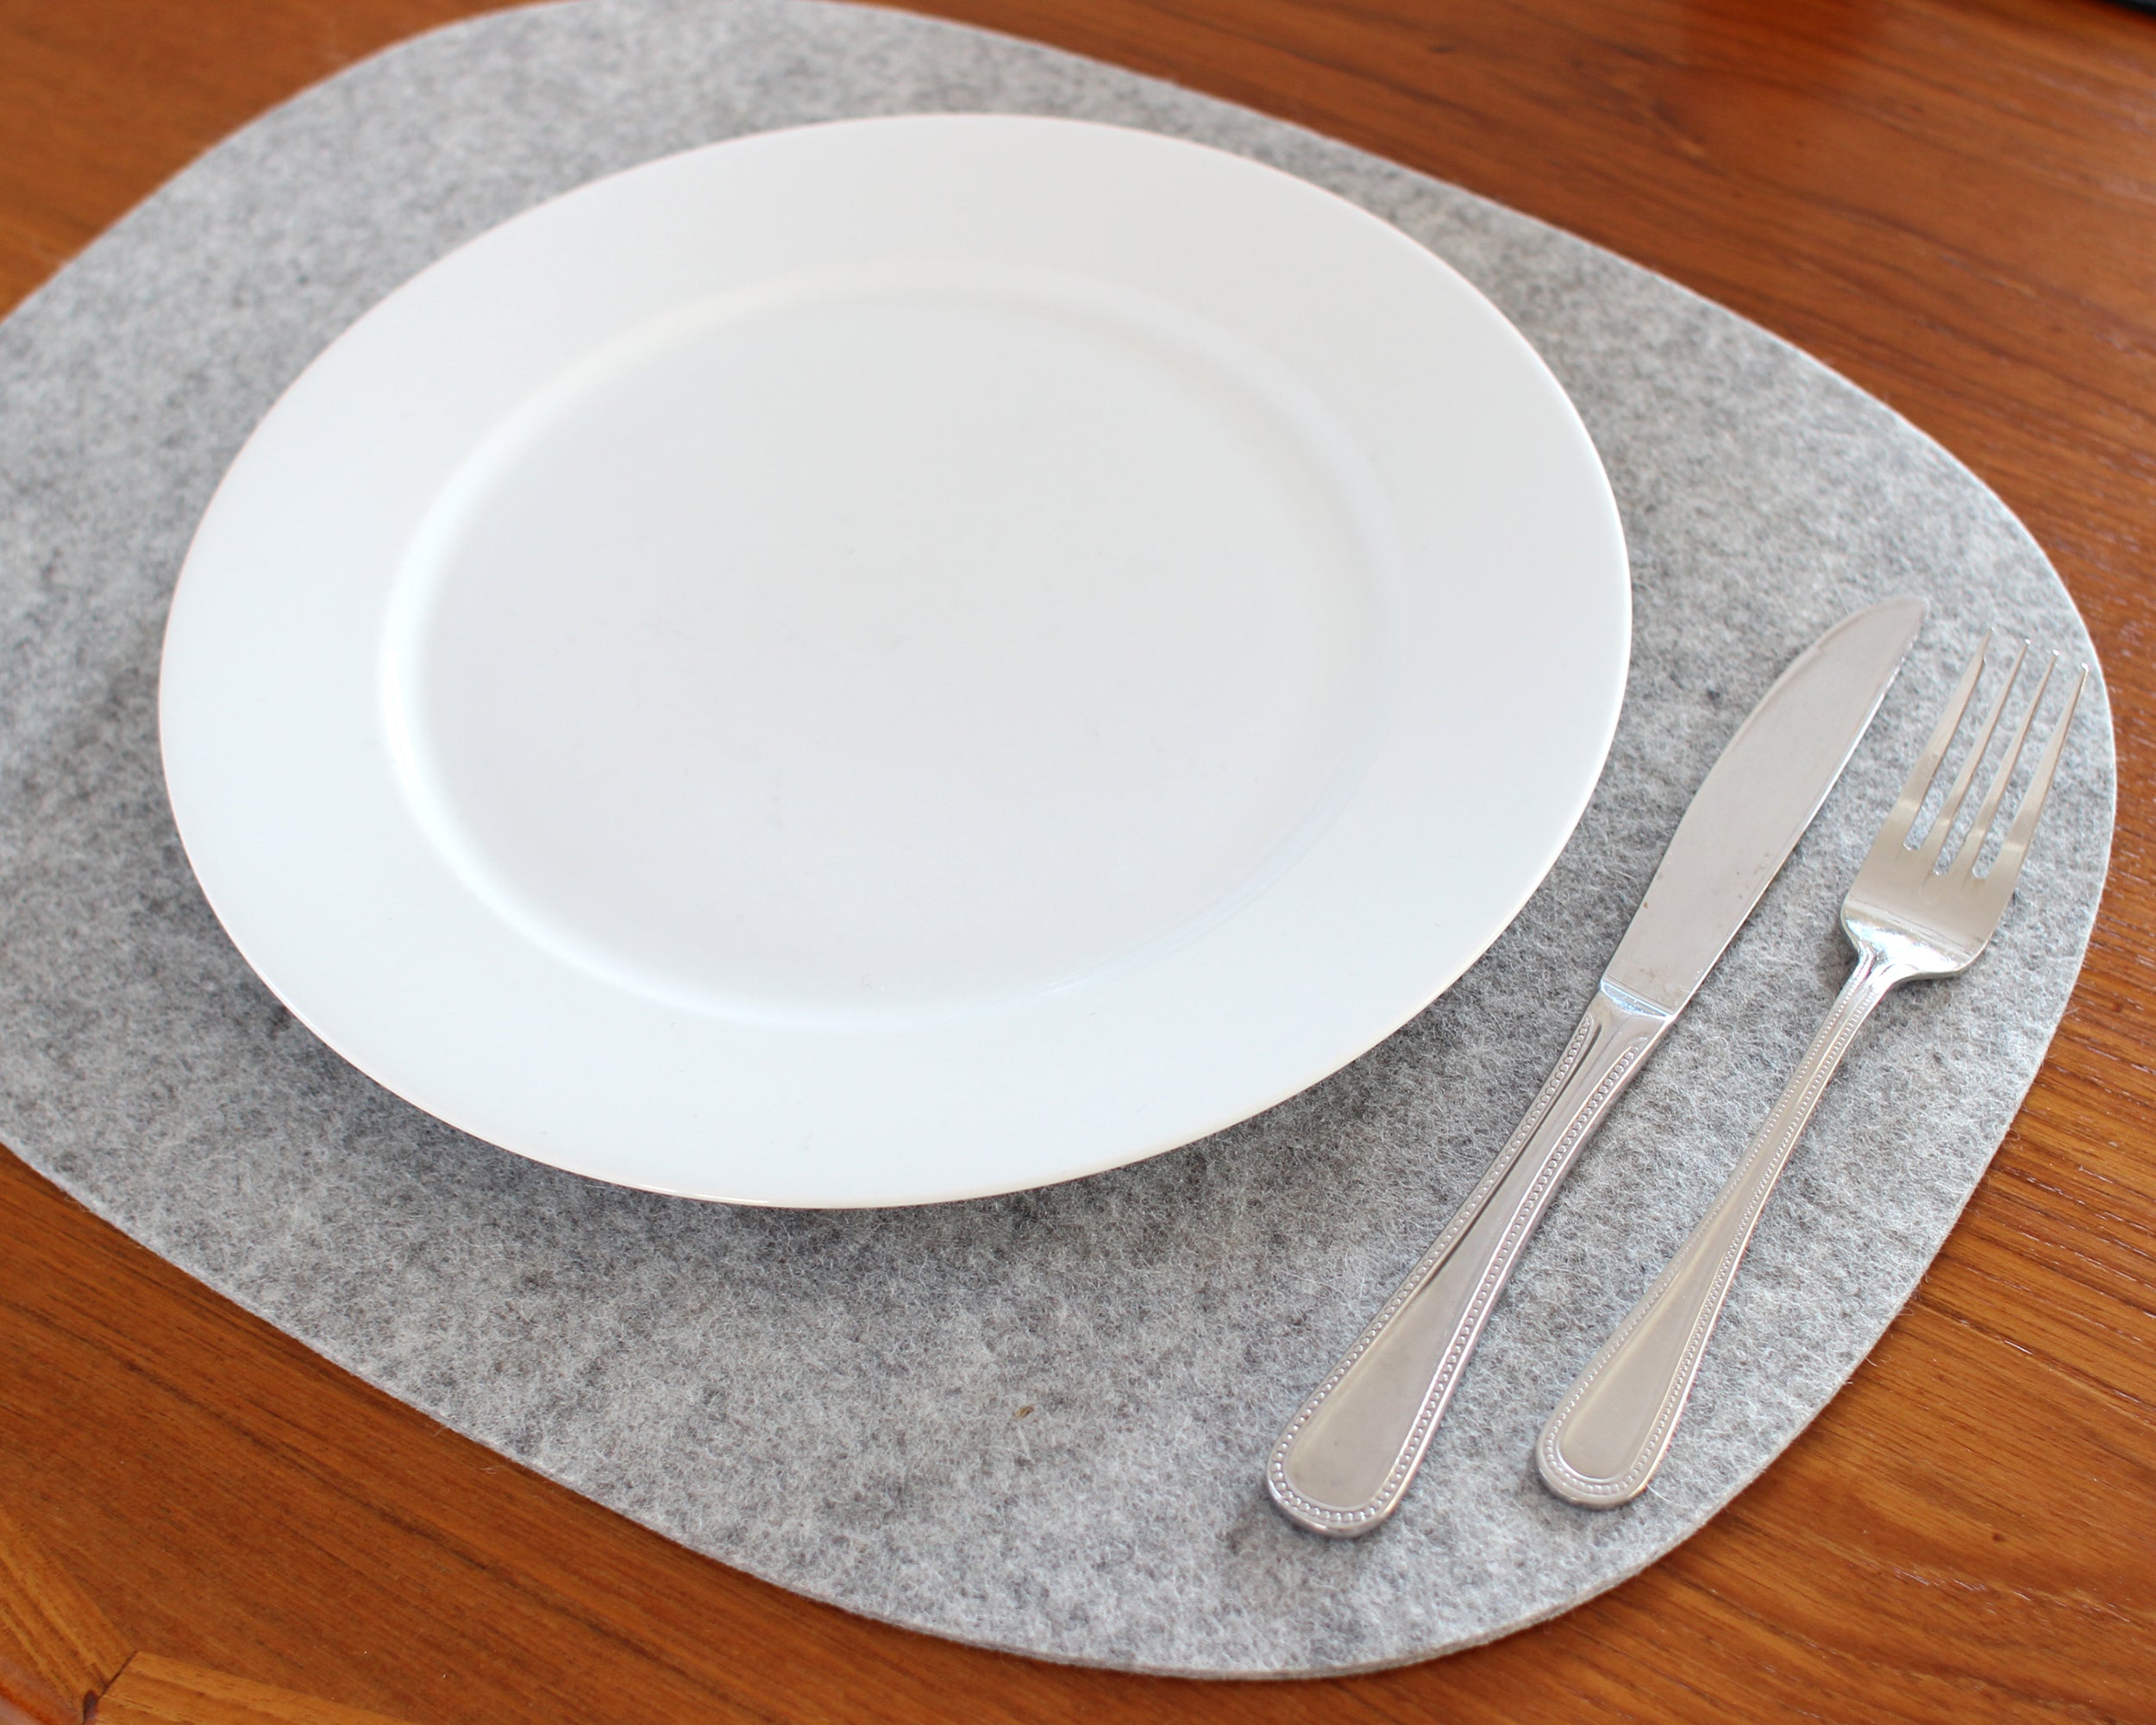 Felt Placemat - Oval - 17.5 x 13.5 inches